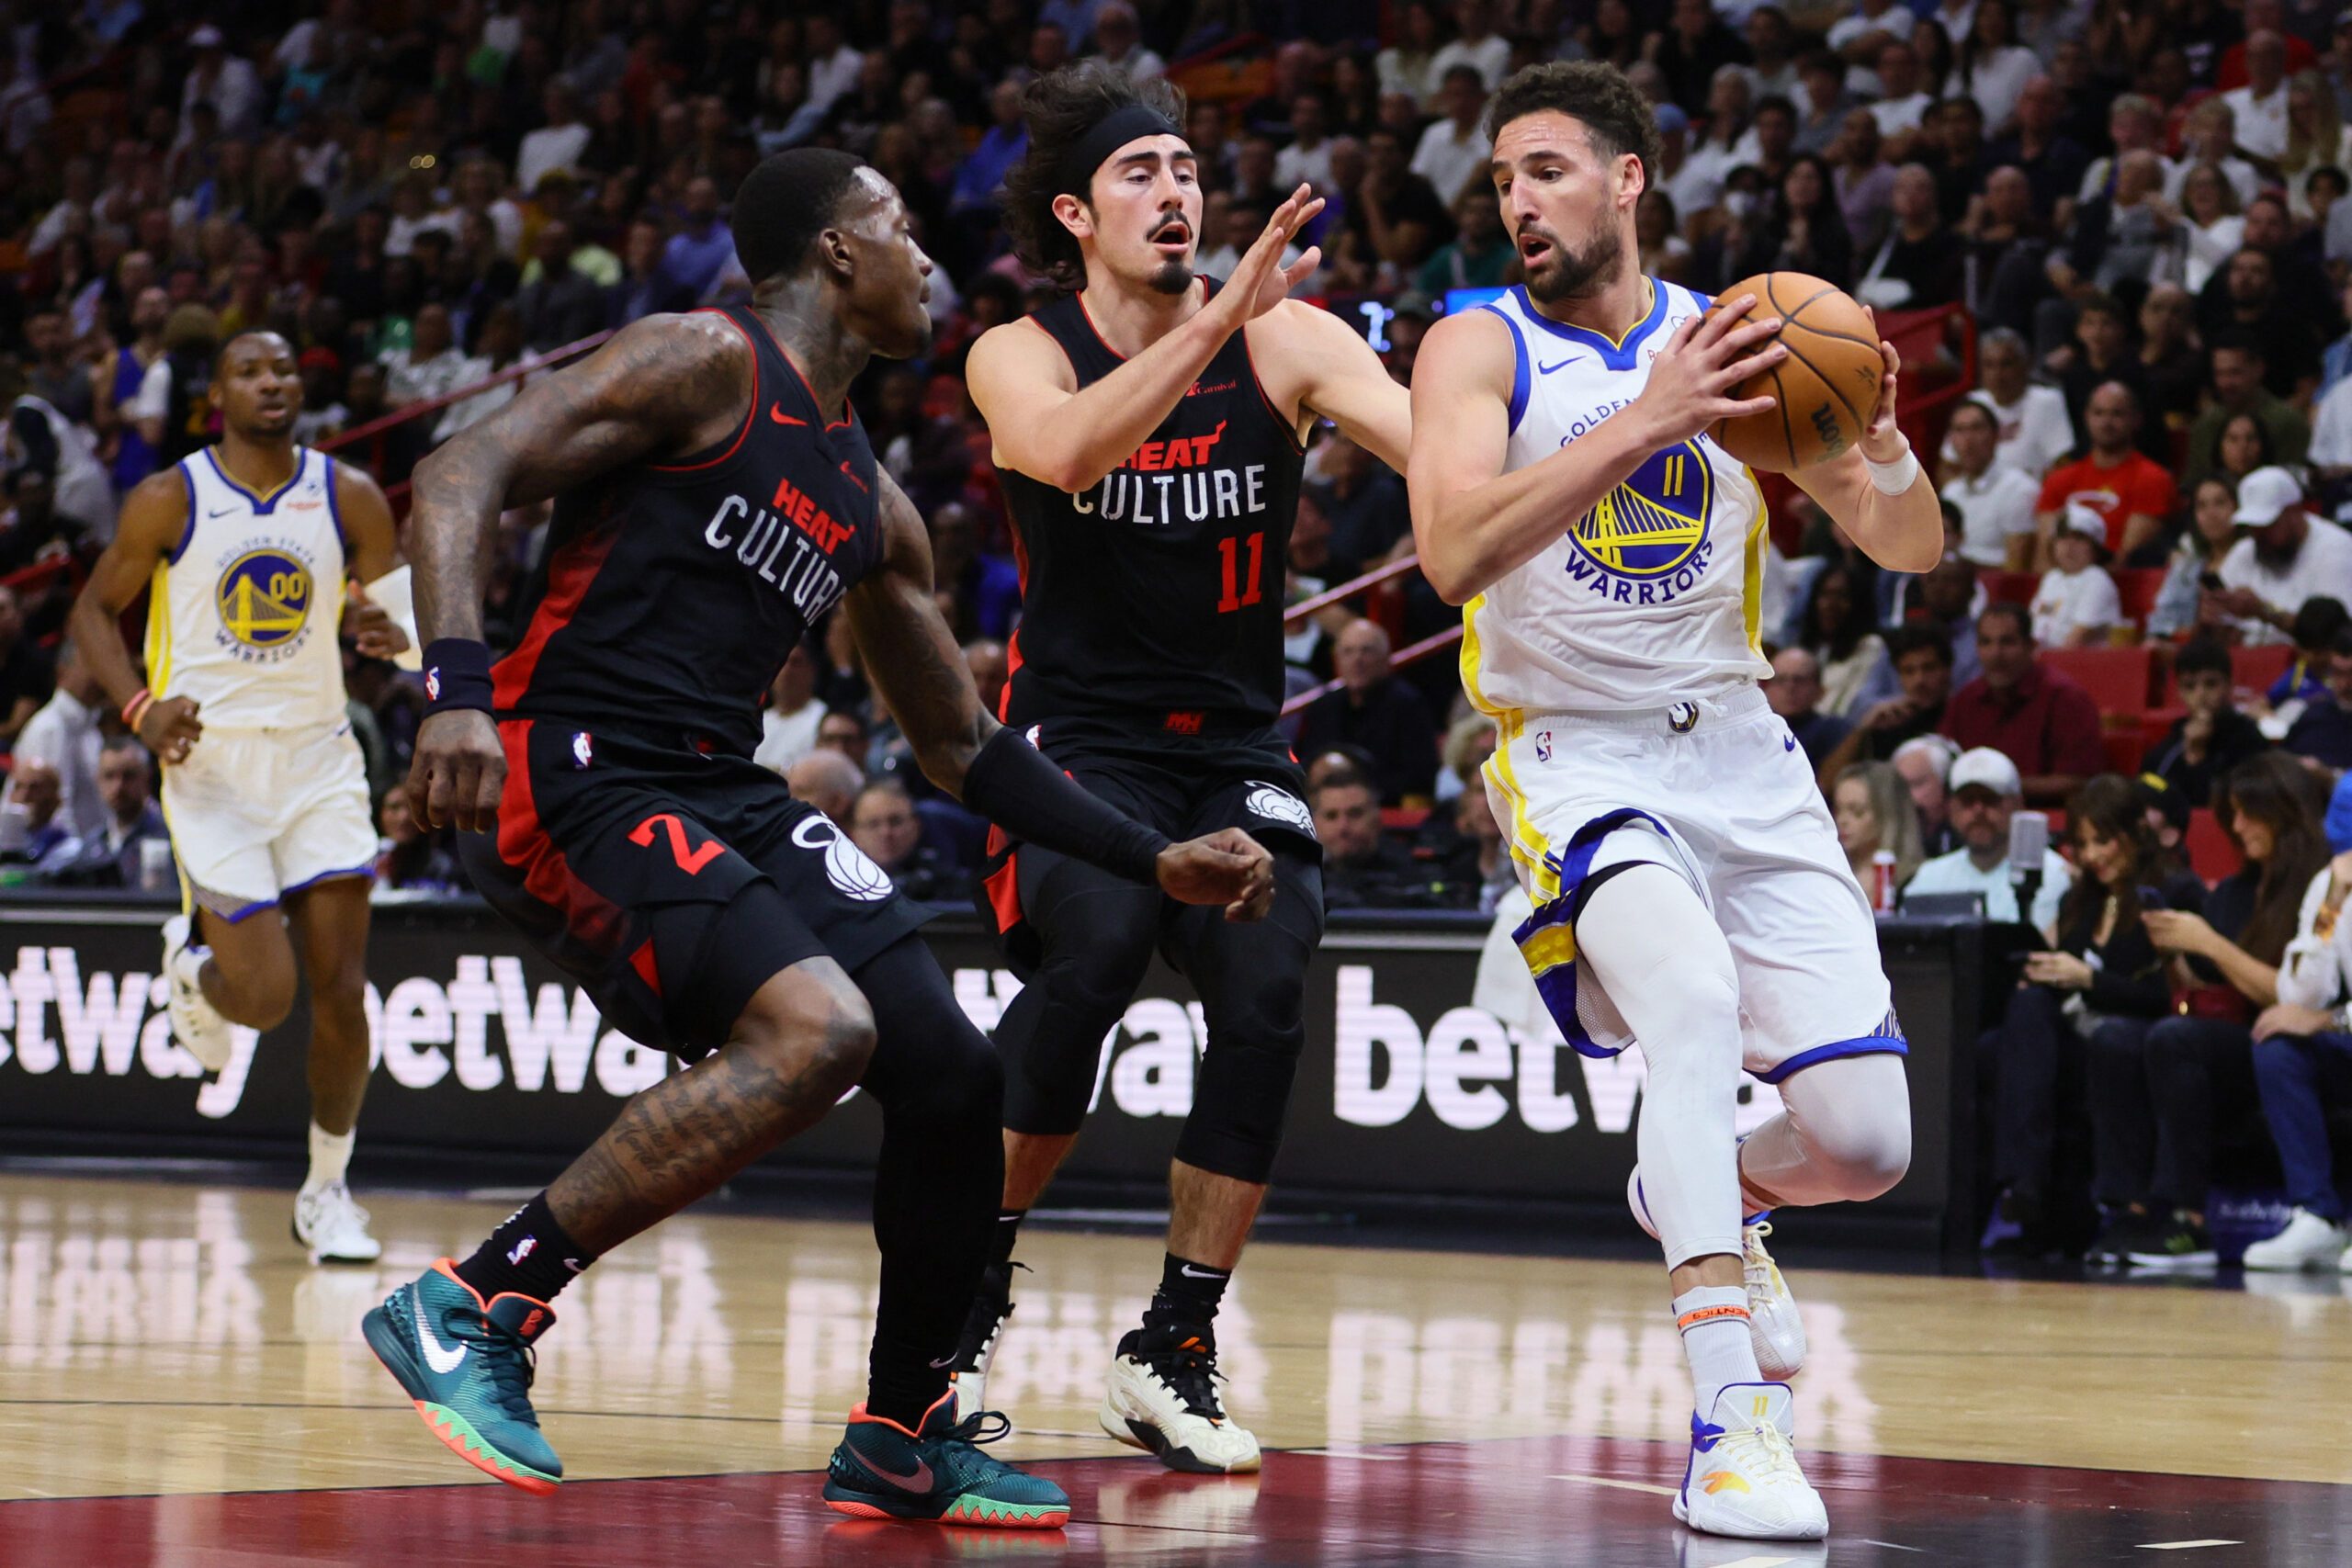 Resurgent Klay Thompson leads Warriors to crucial rout of banged-up Heat